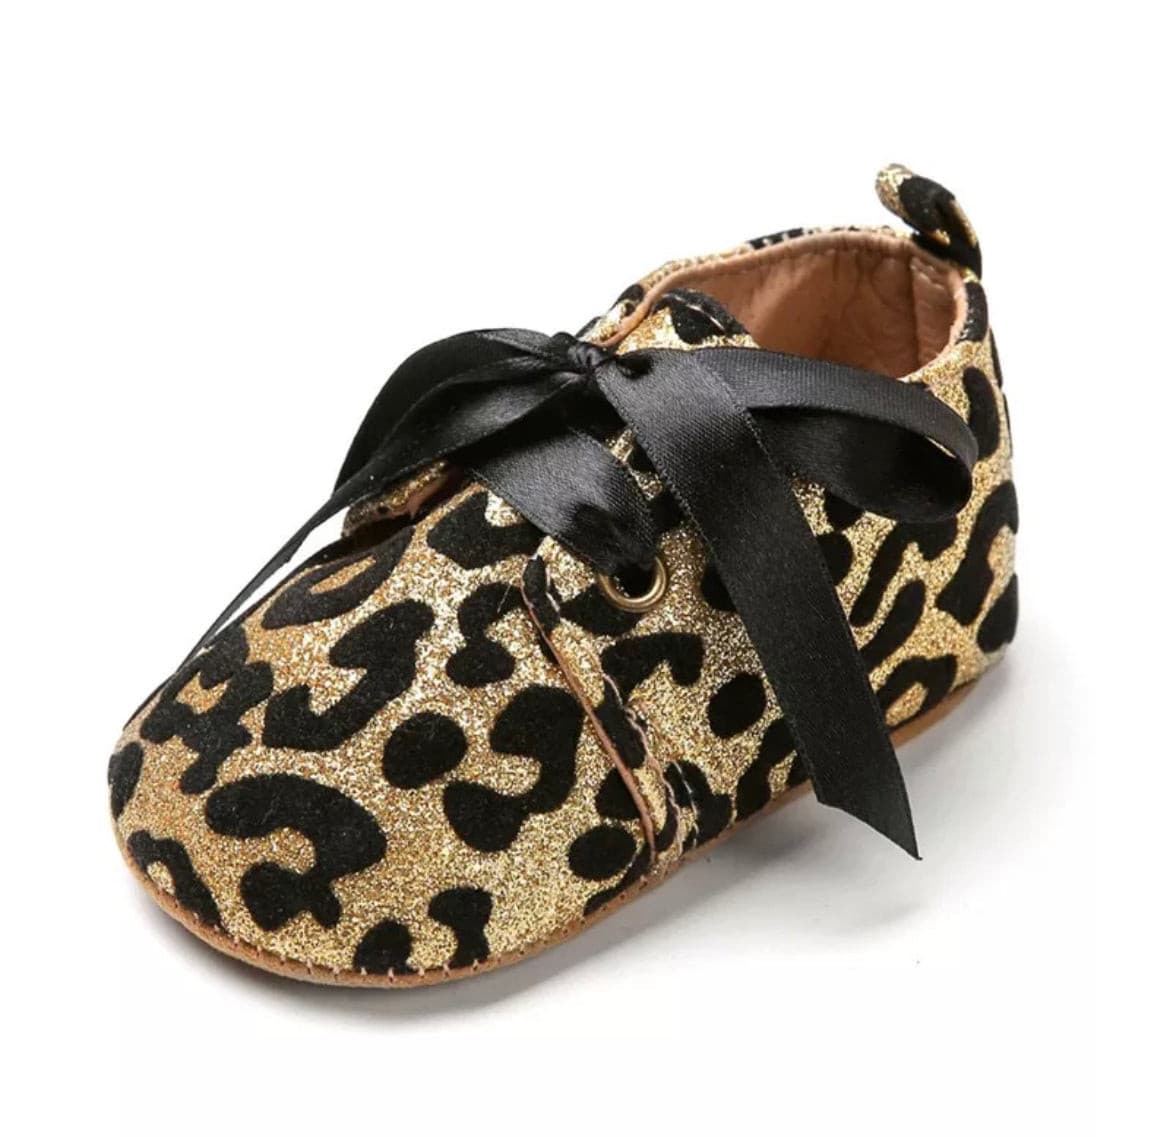 Glitterati- Gold Leopard Glitter Baby Shoes - First Walker Vegan Leaher with Velcro Straps.